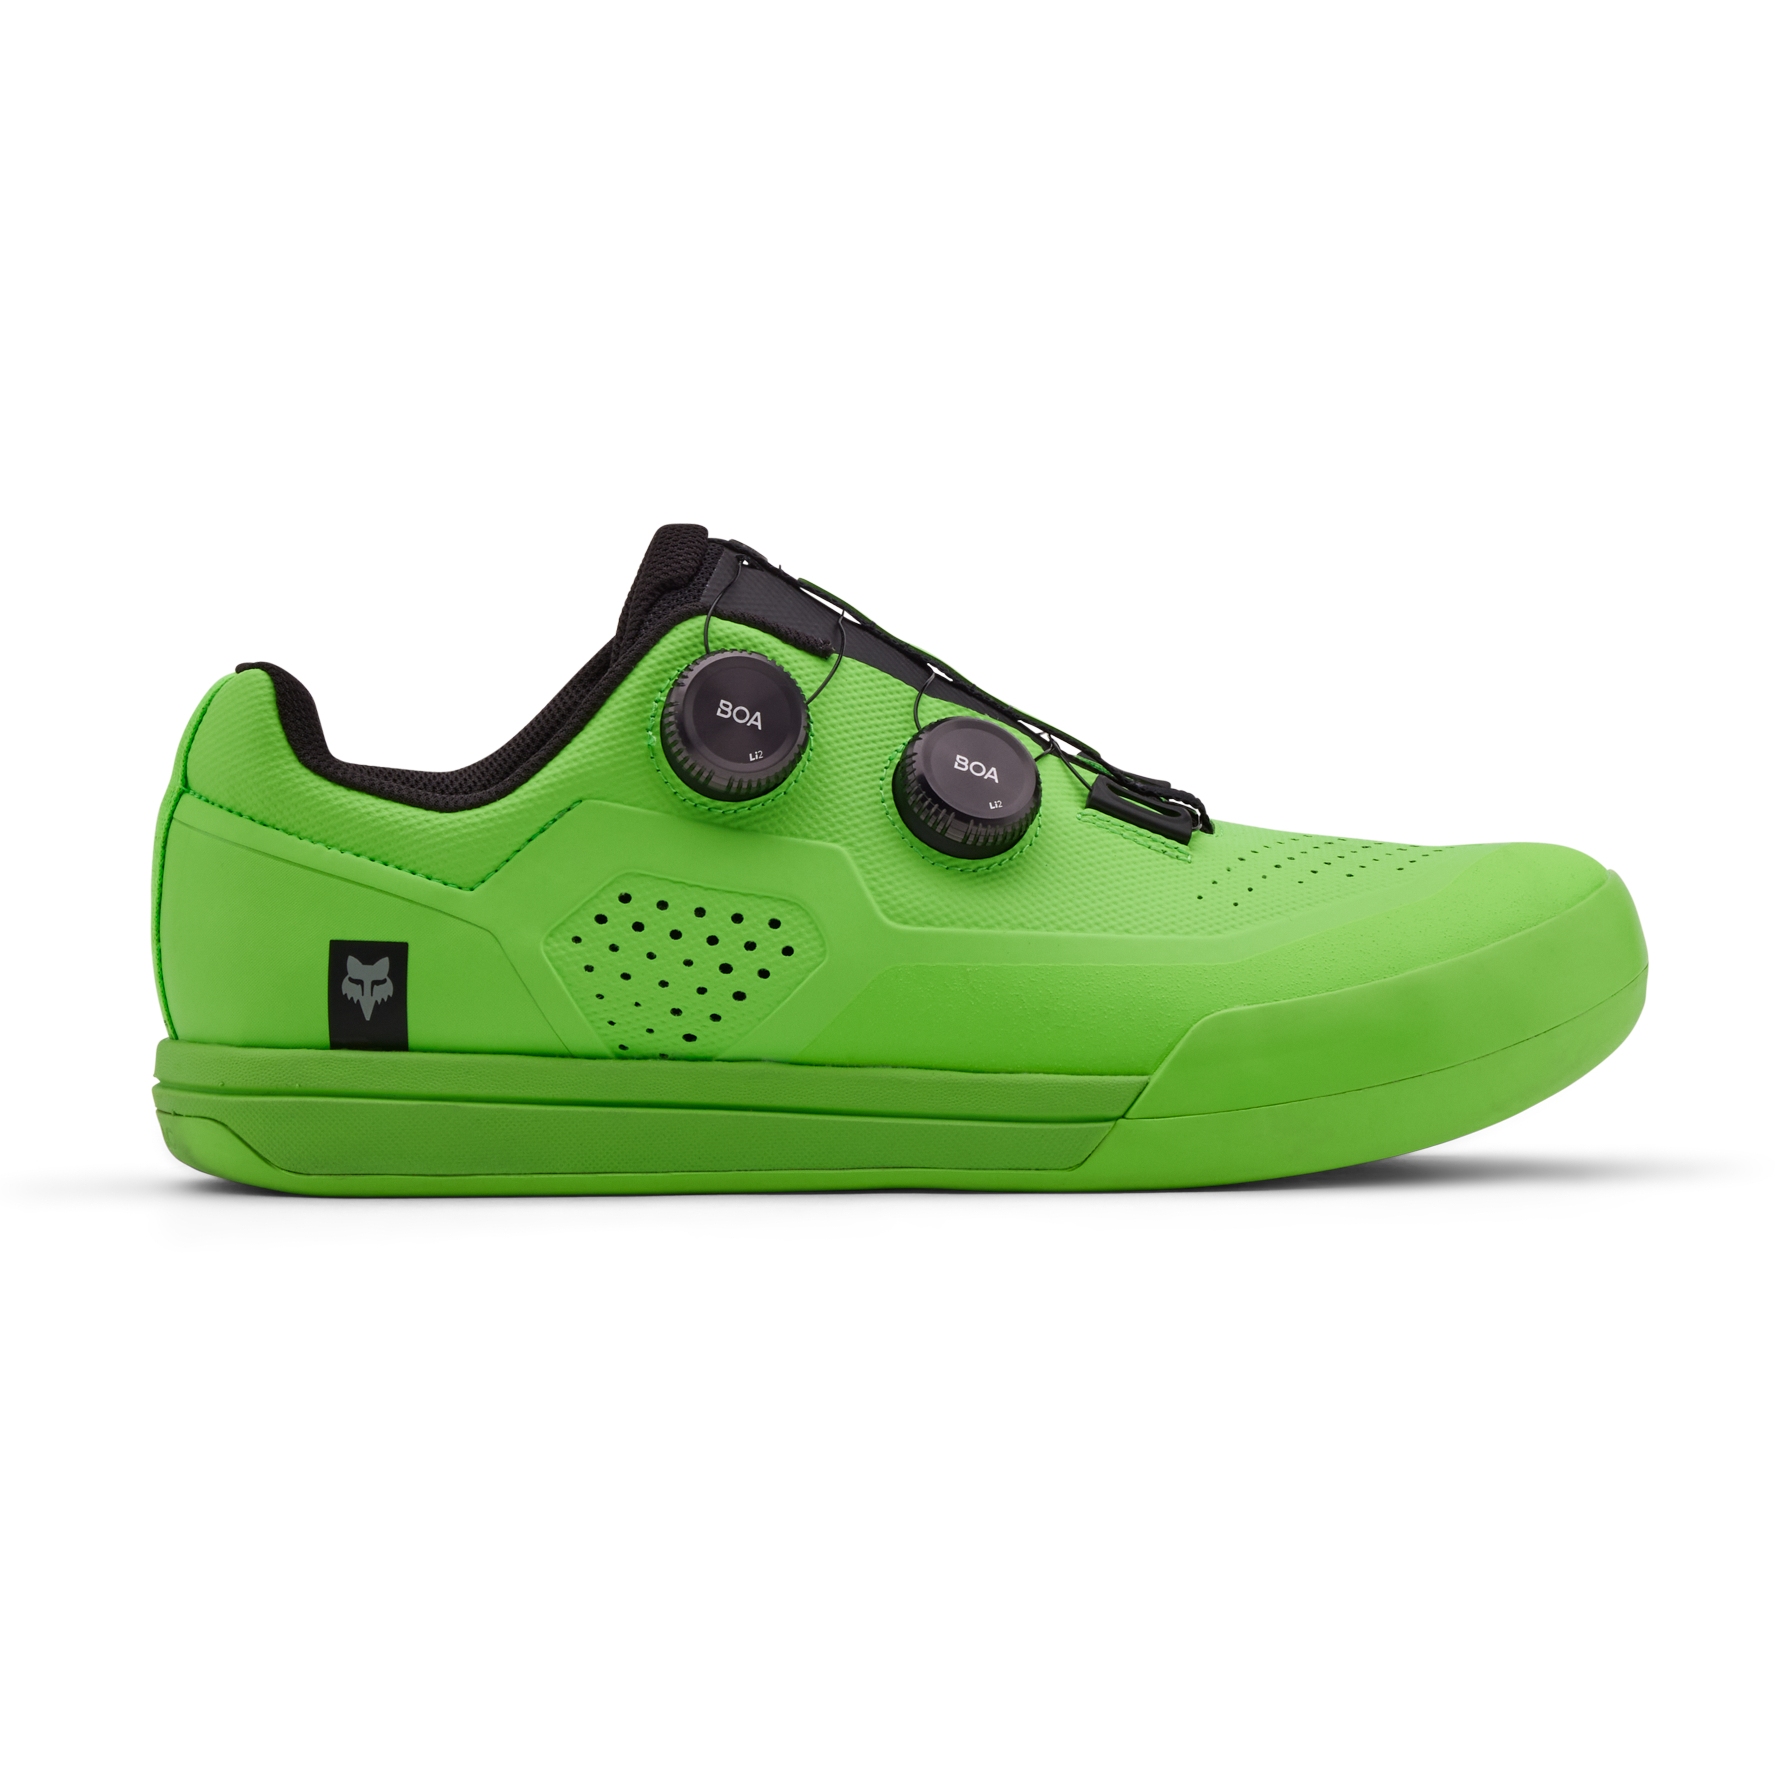 Picture of FOX Union BOA Cleated MTB Shoes - acid green - 50 Years Edition